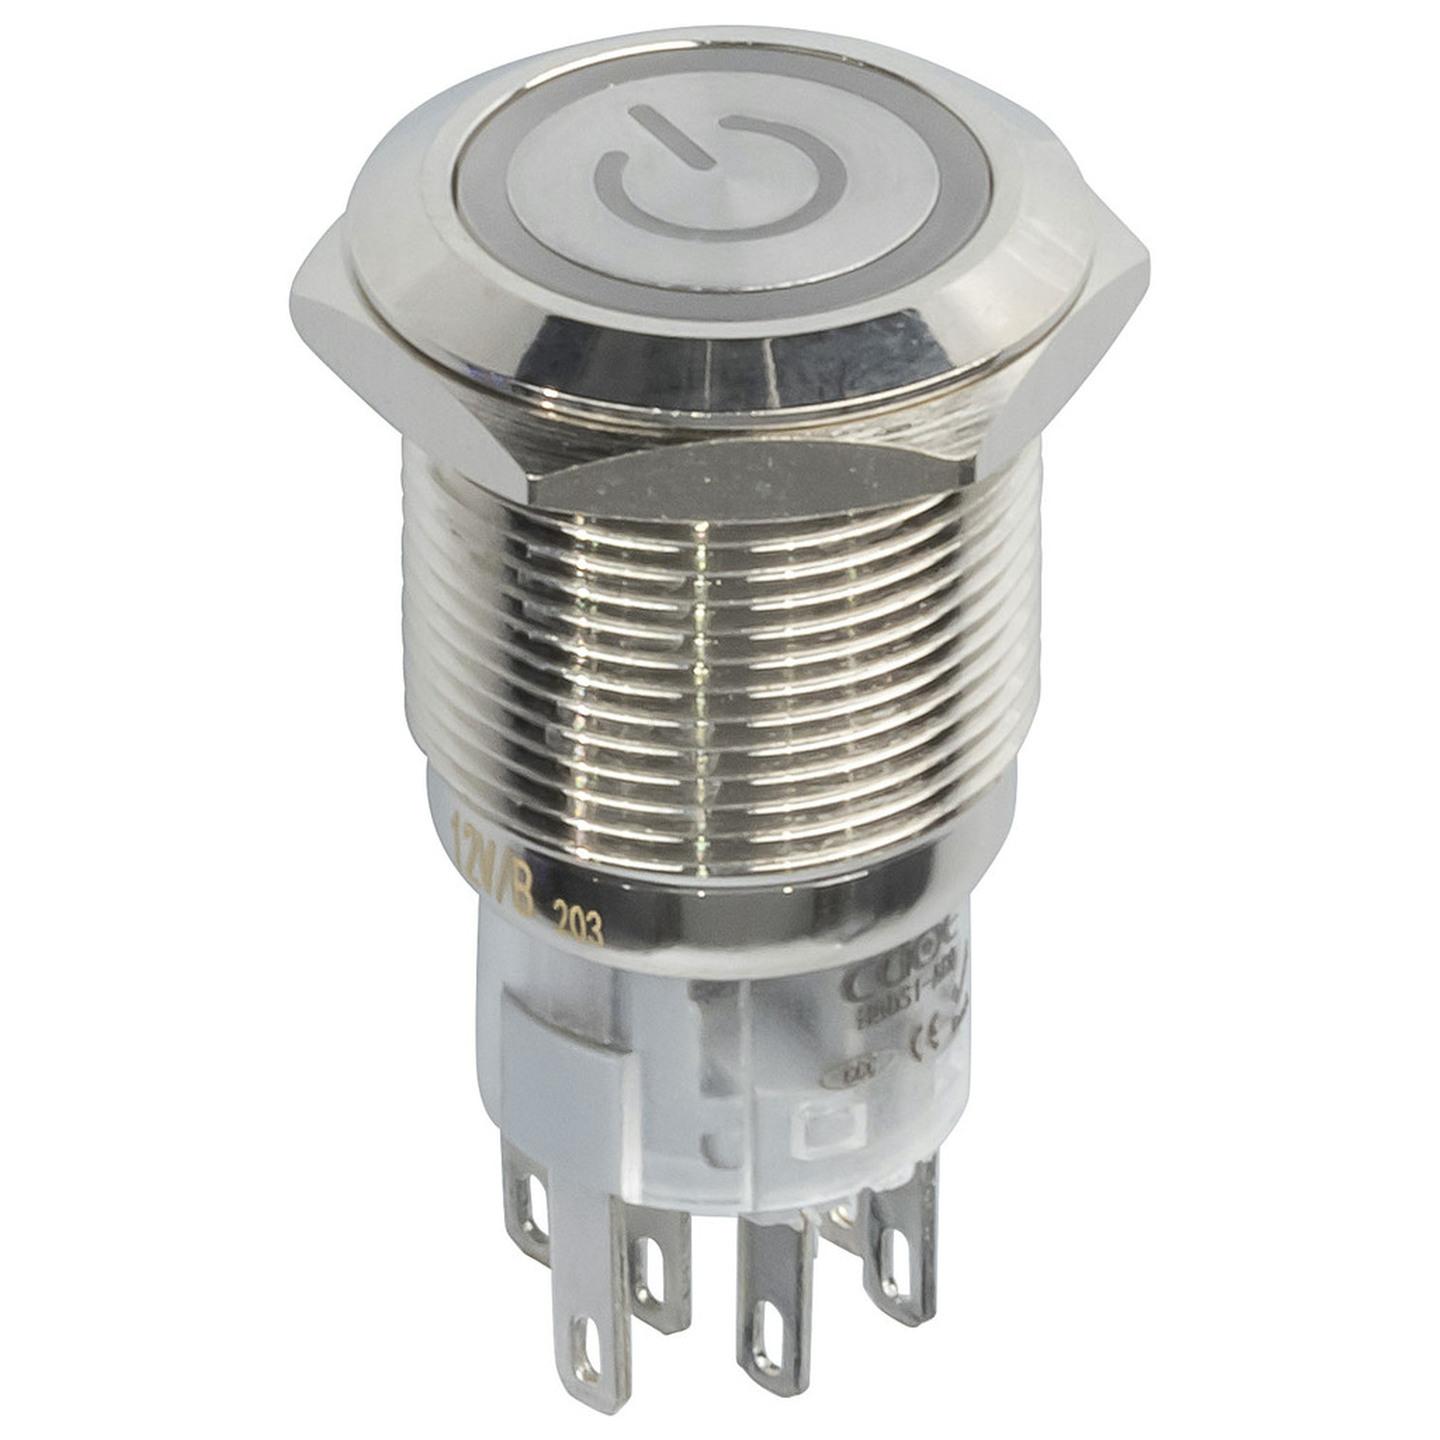 Blue 19mm IP67 Metal Pushbutton Momentary Switch with Illuminated Power Indicator